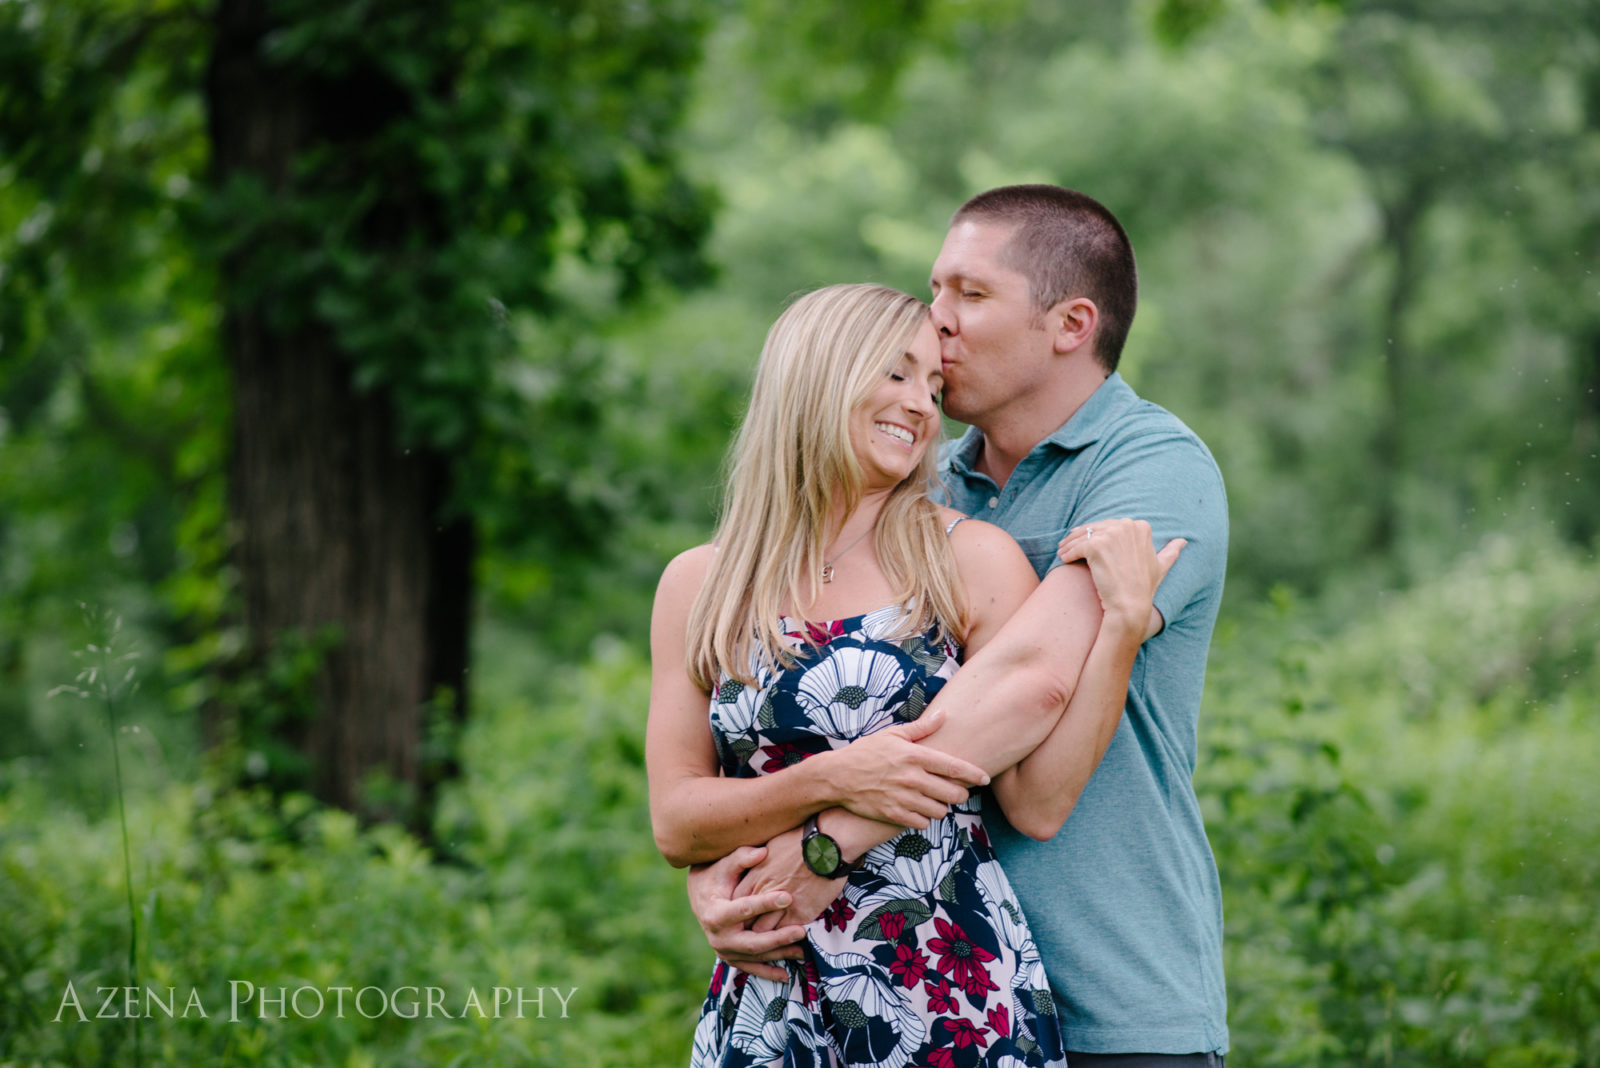 Summer engagement session. A lovely kiss.